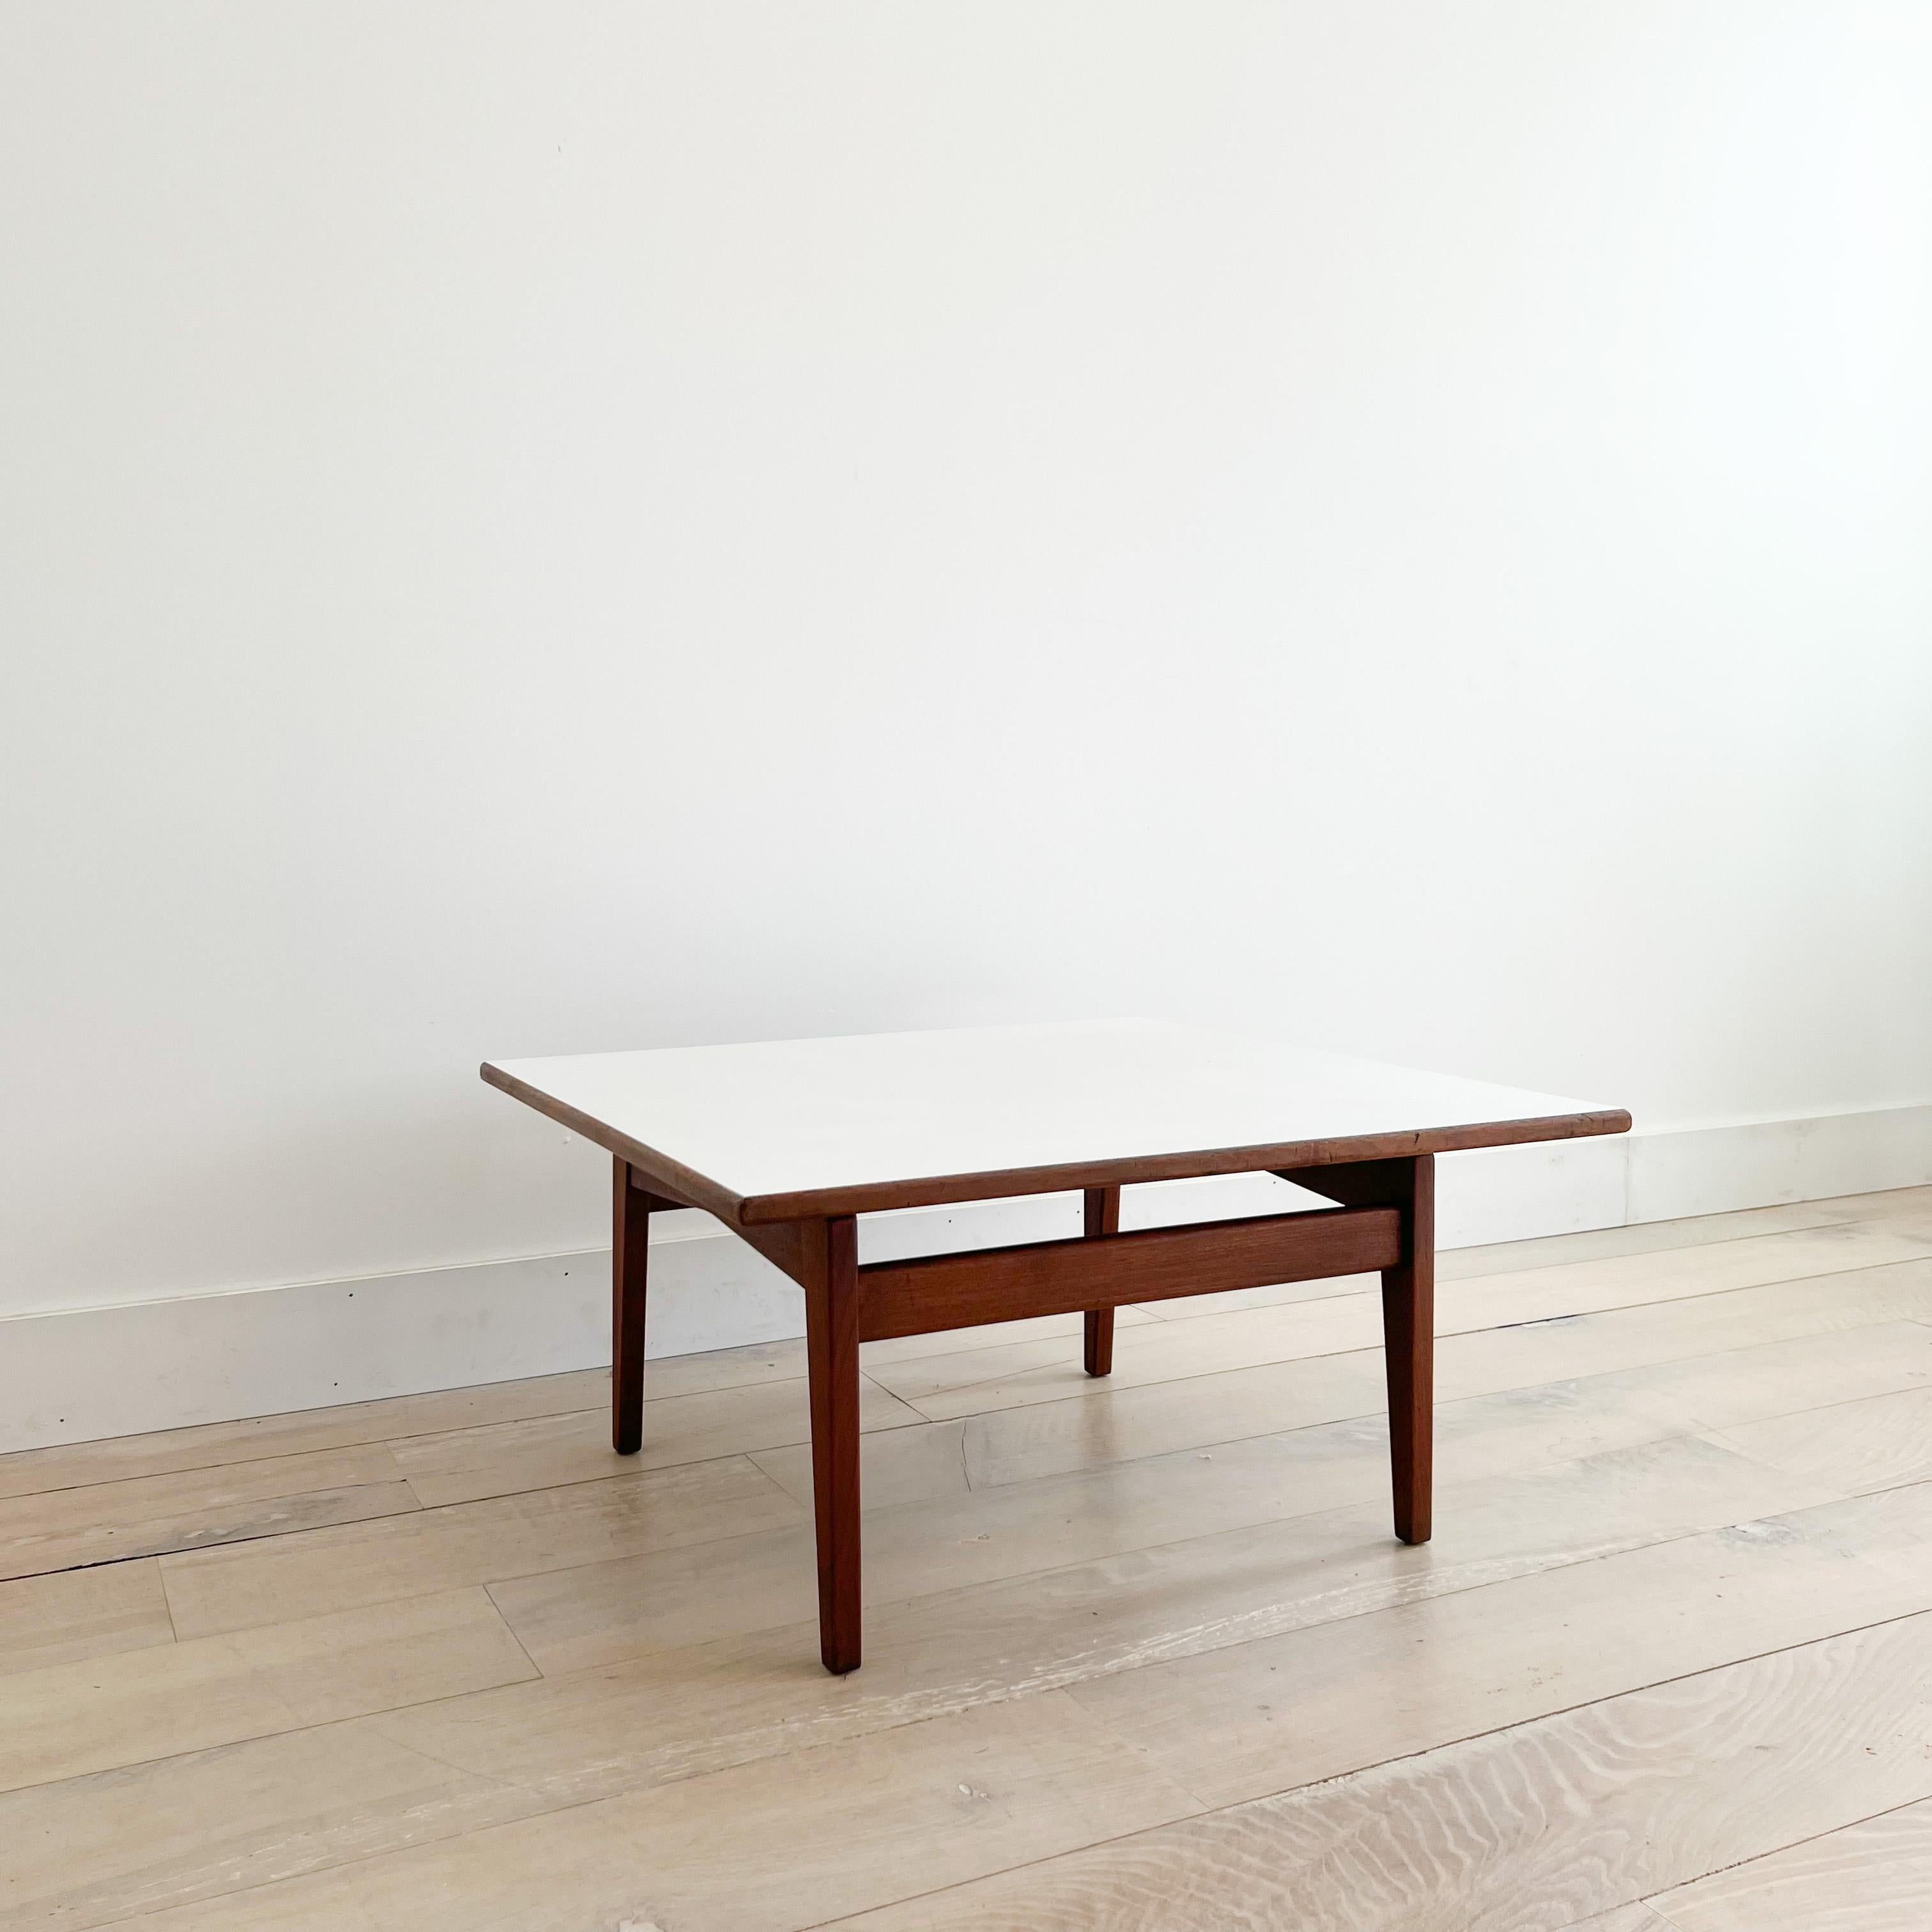 Mid-Century Modern walnut coffee table with white Formica top designed by Jens Risom. Some light scuffing/scratching from age appropriate wear.
       